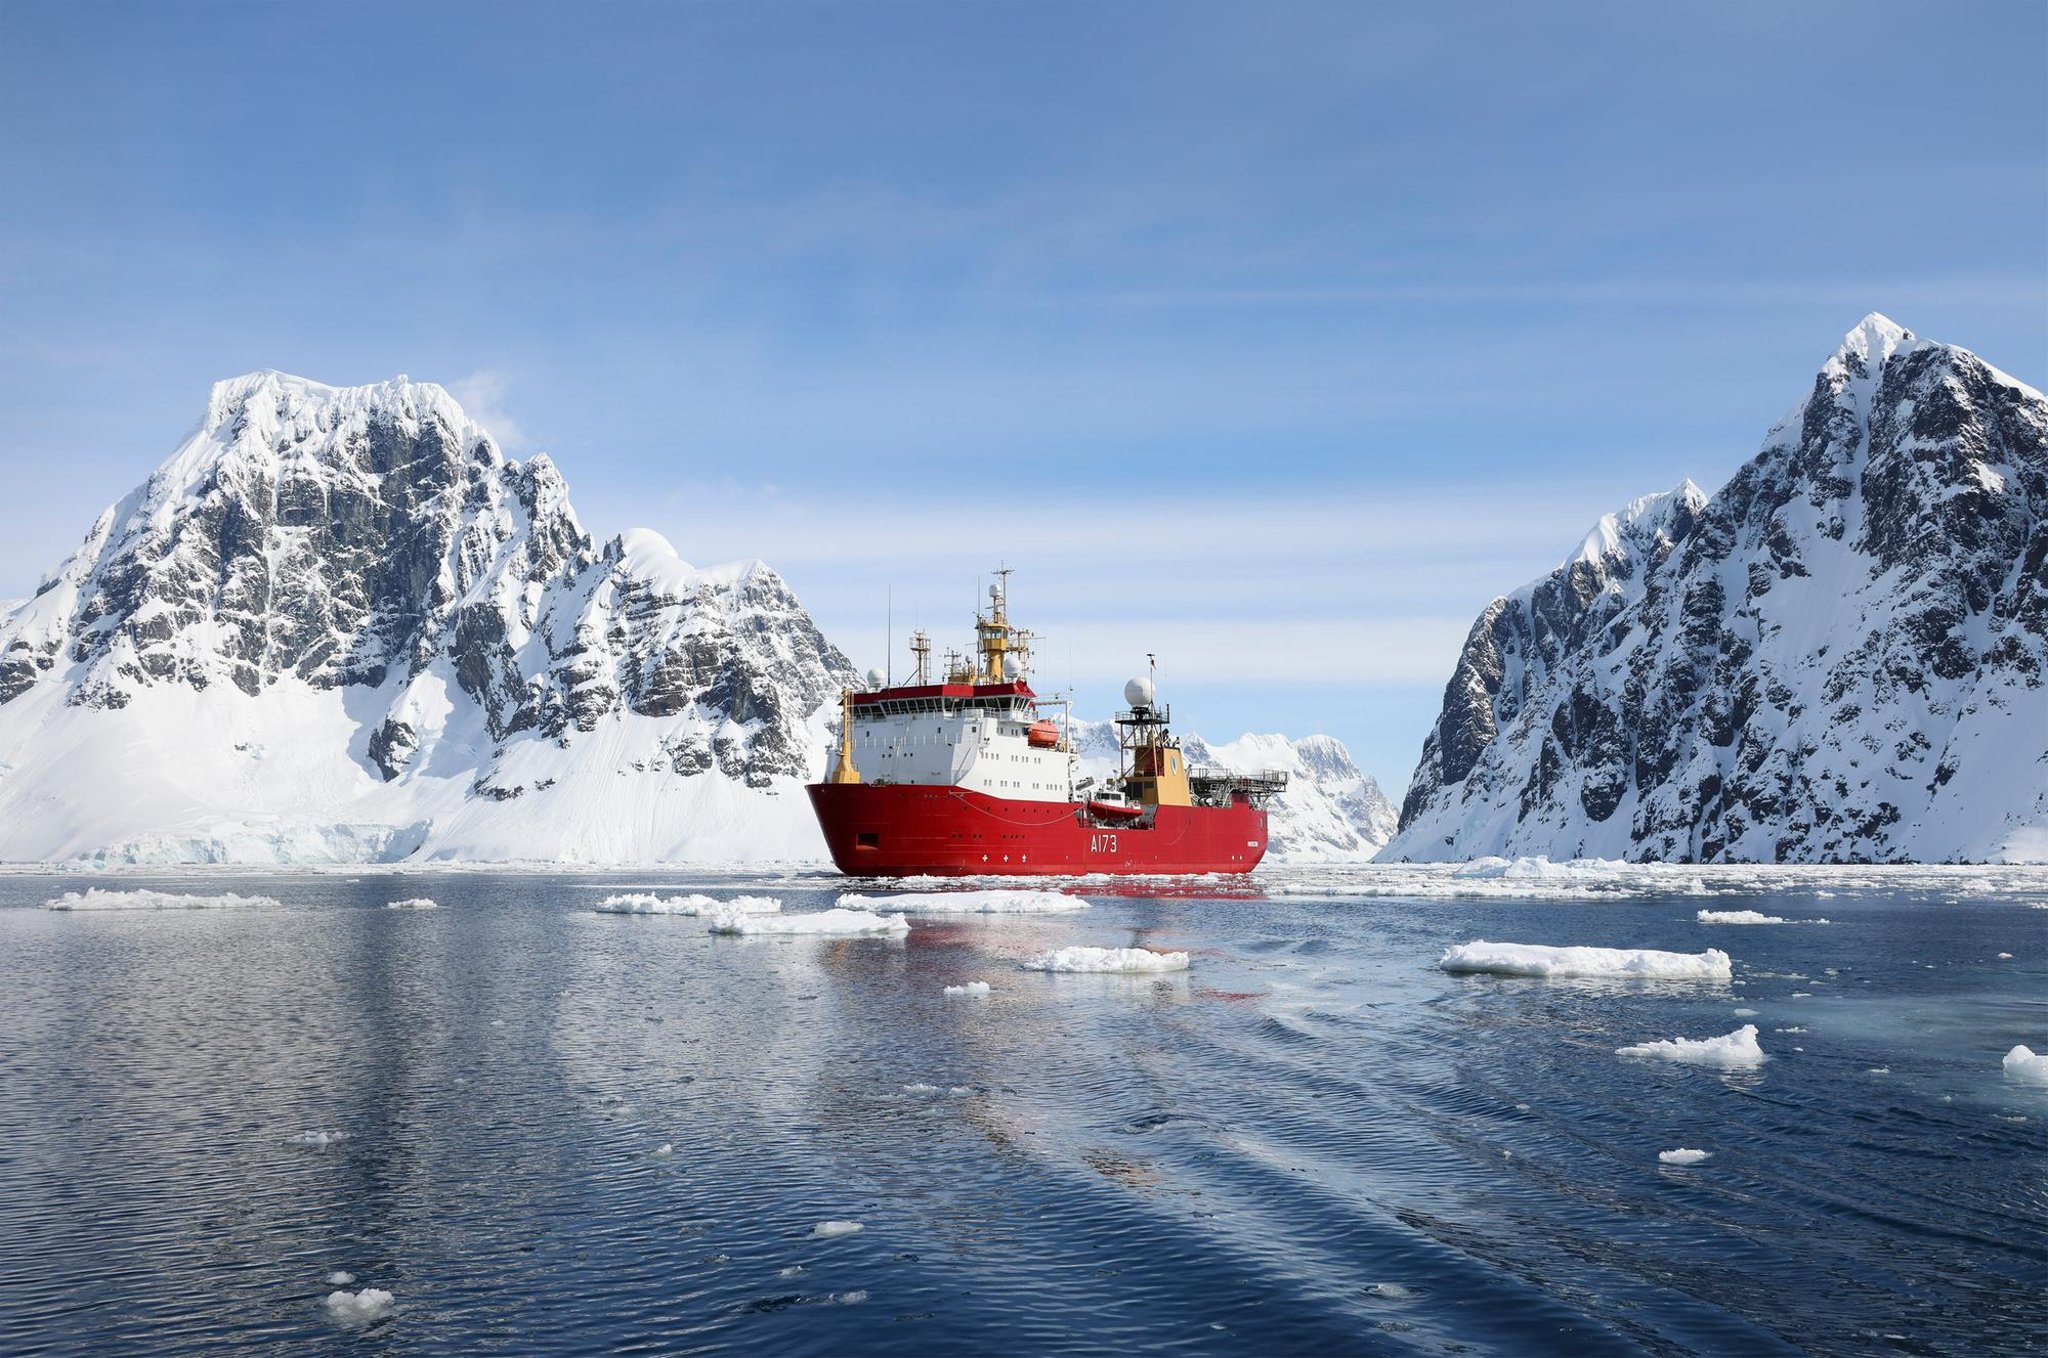 Royal Navy ice ship HMS Protector reveals impact of global warming in Antarctica - Portsmouth News